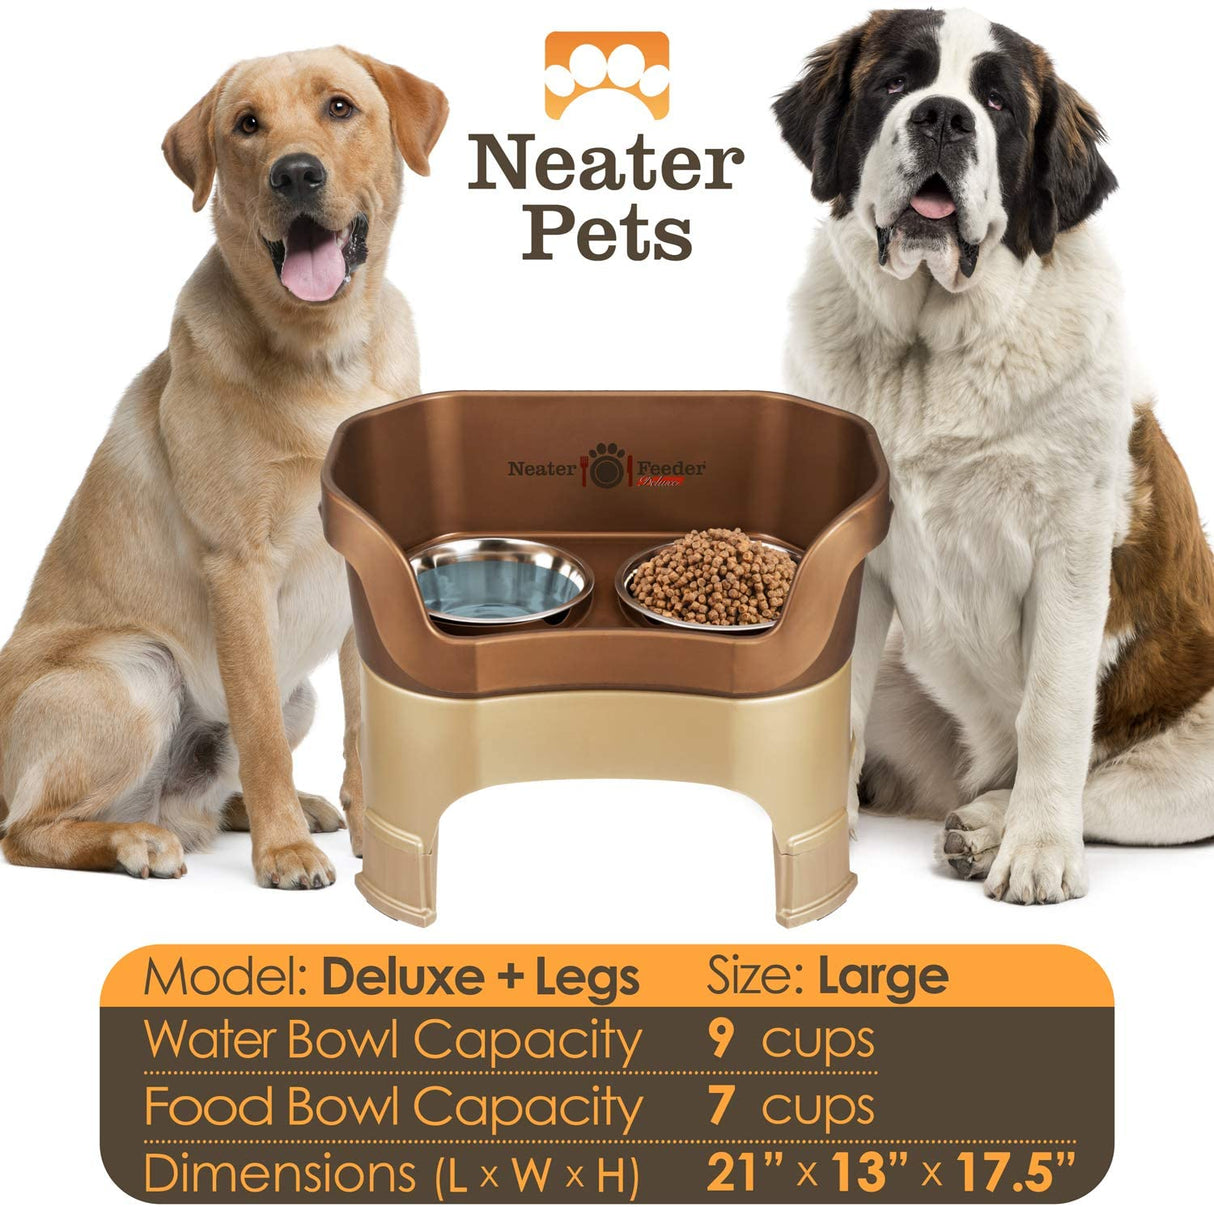 Bronze Large Dog with leg extensions bowl capacity